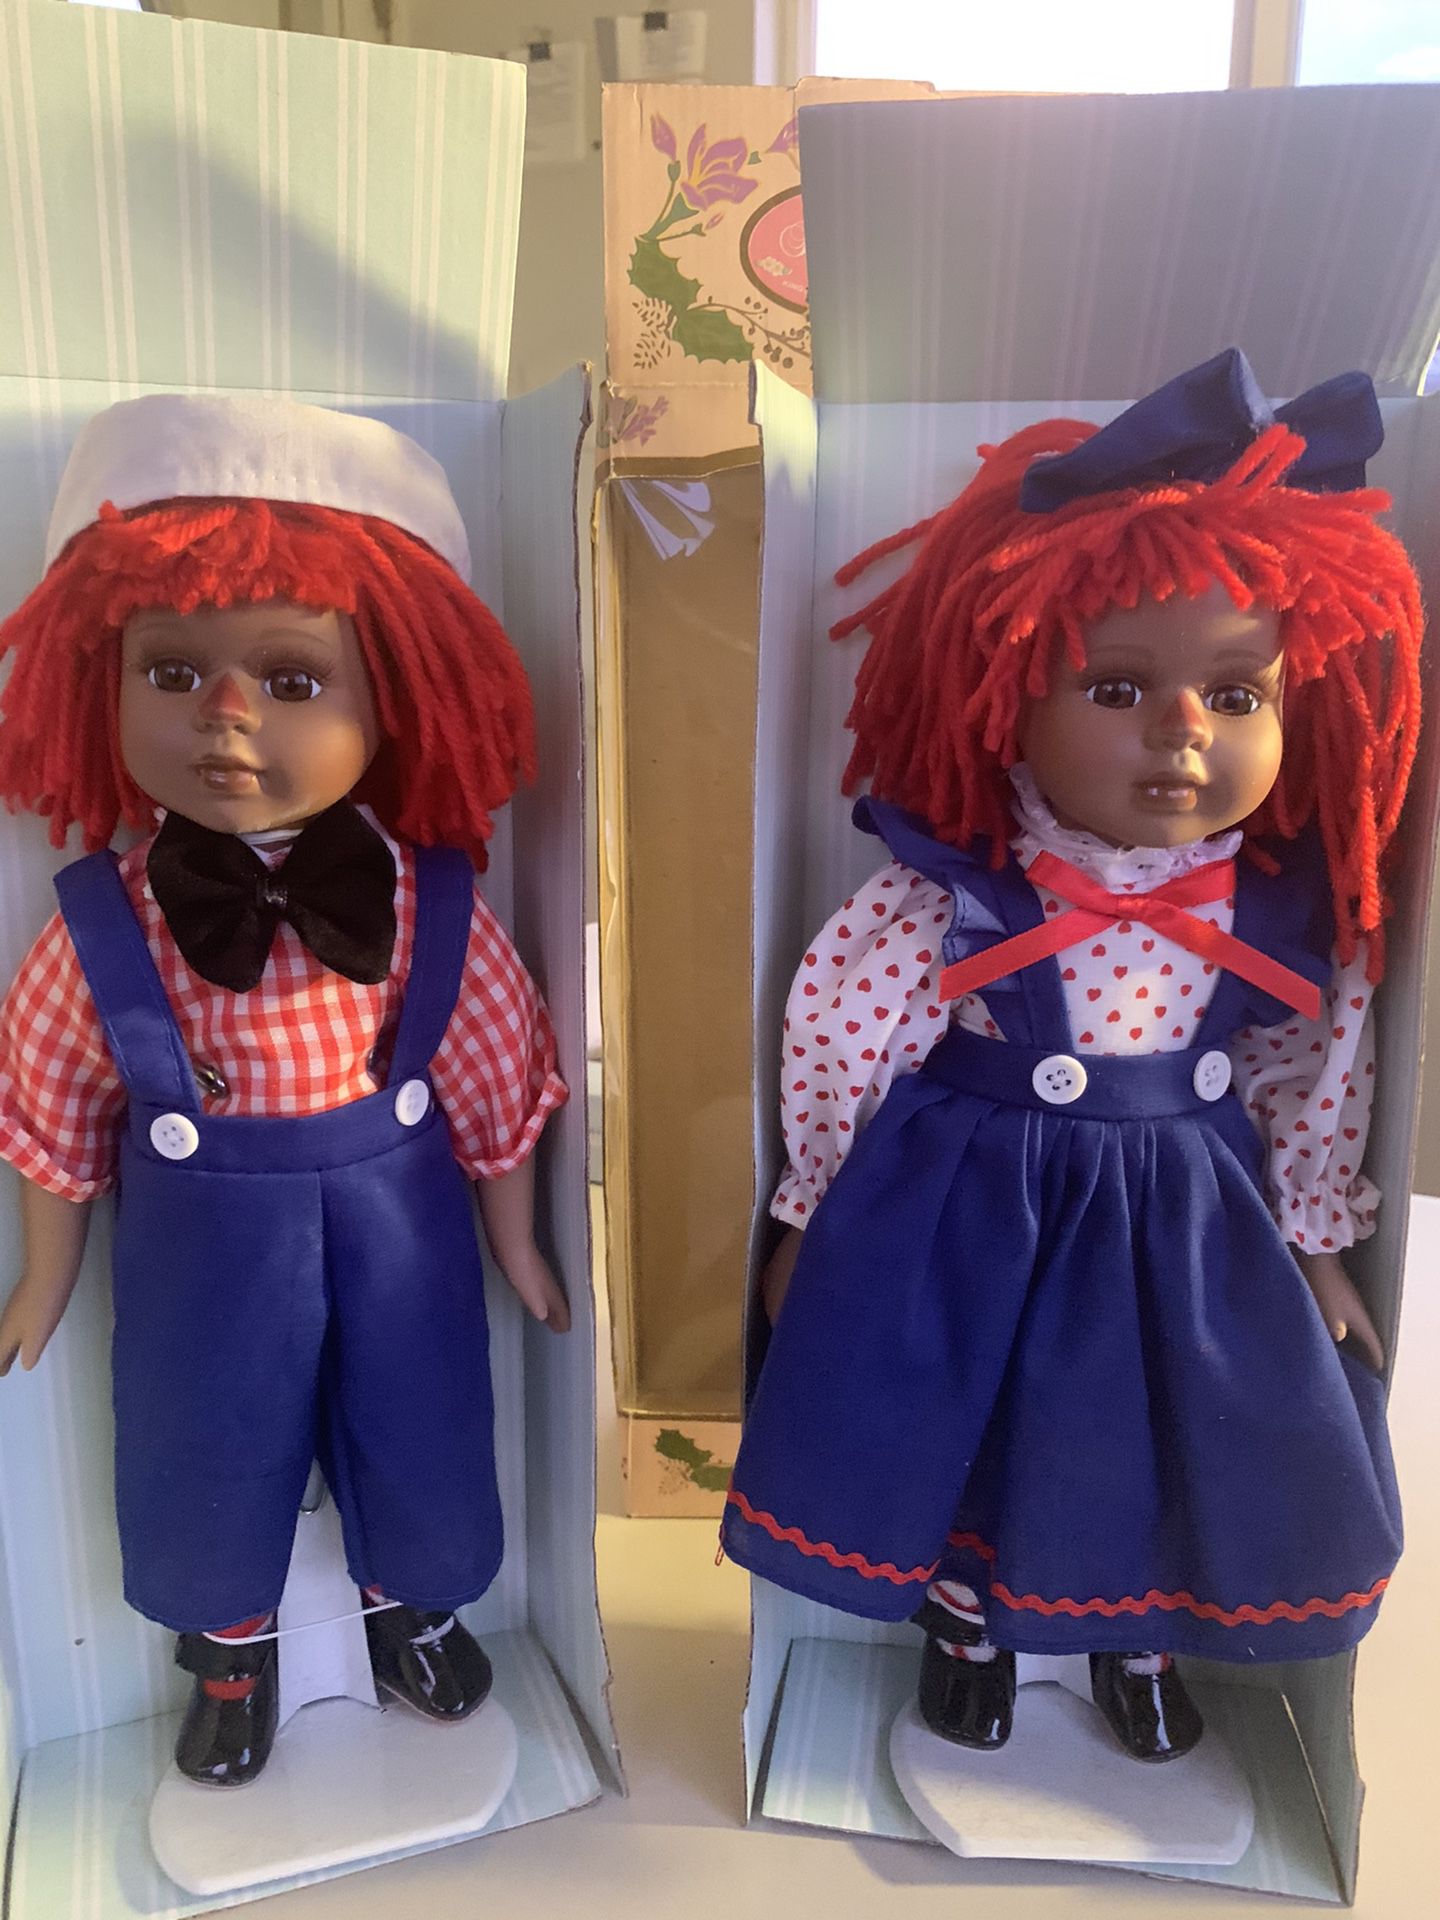 Beautiful Raggedy Ann & Andy Collectible Porcelain Dolls